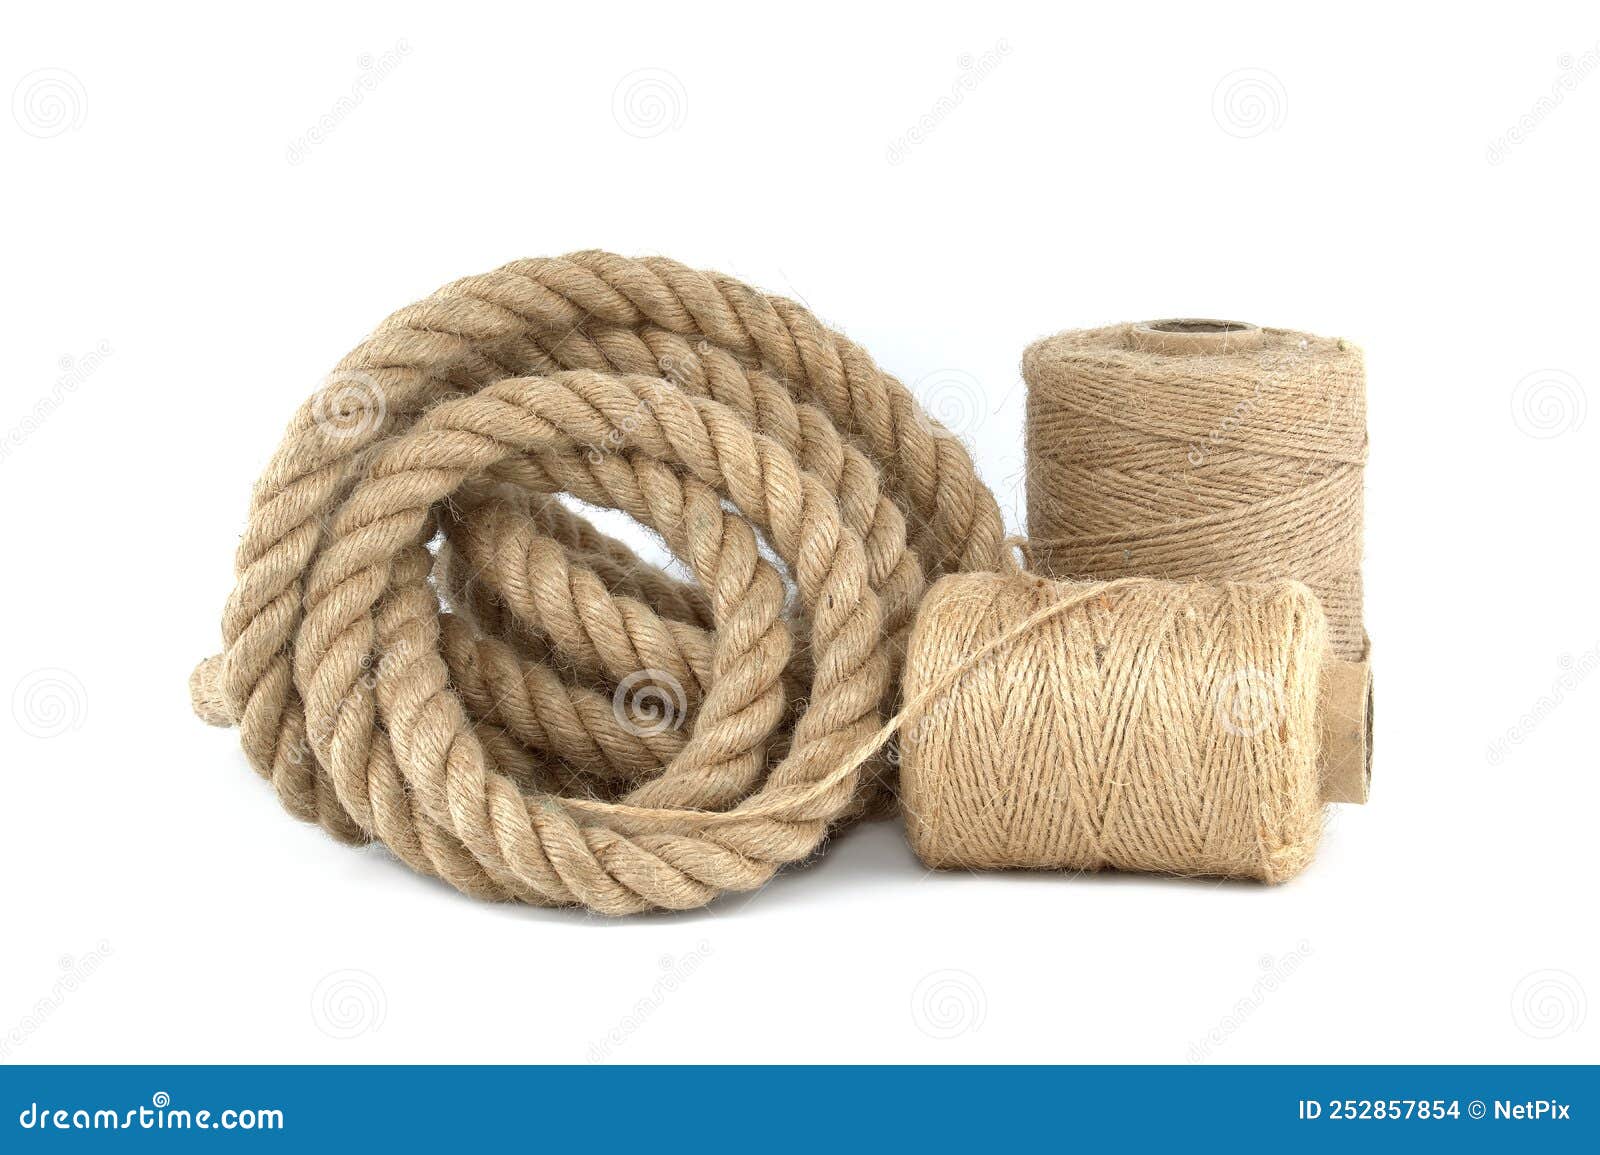 Twisted Jute Rope and Spools of Burlap Threads or Twine Stock Photo - Image  of flax, craft: 252857854